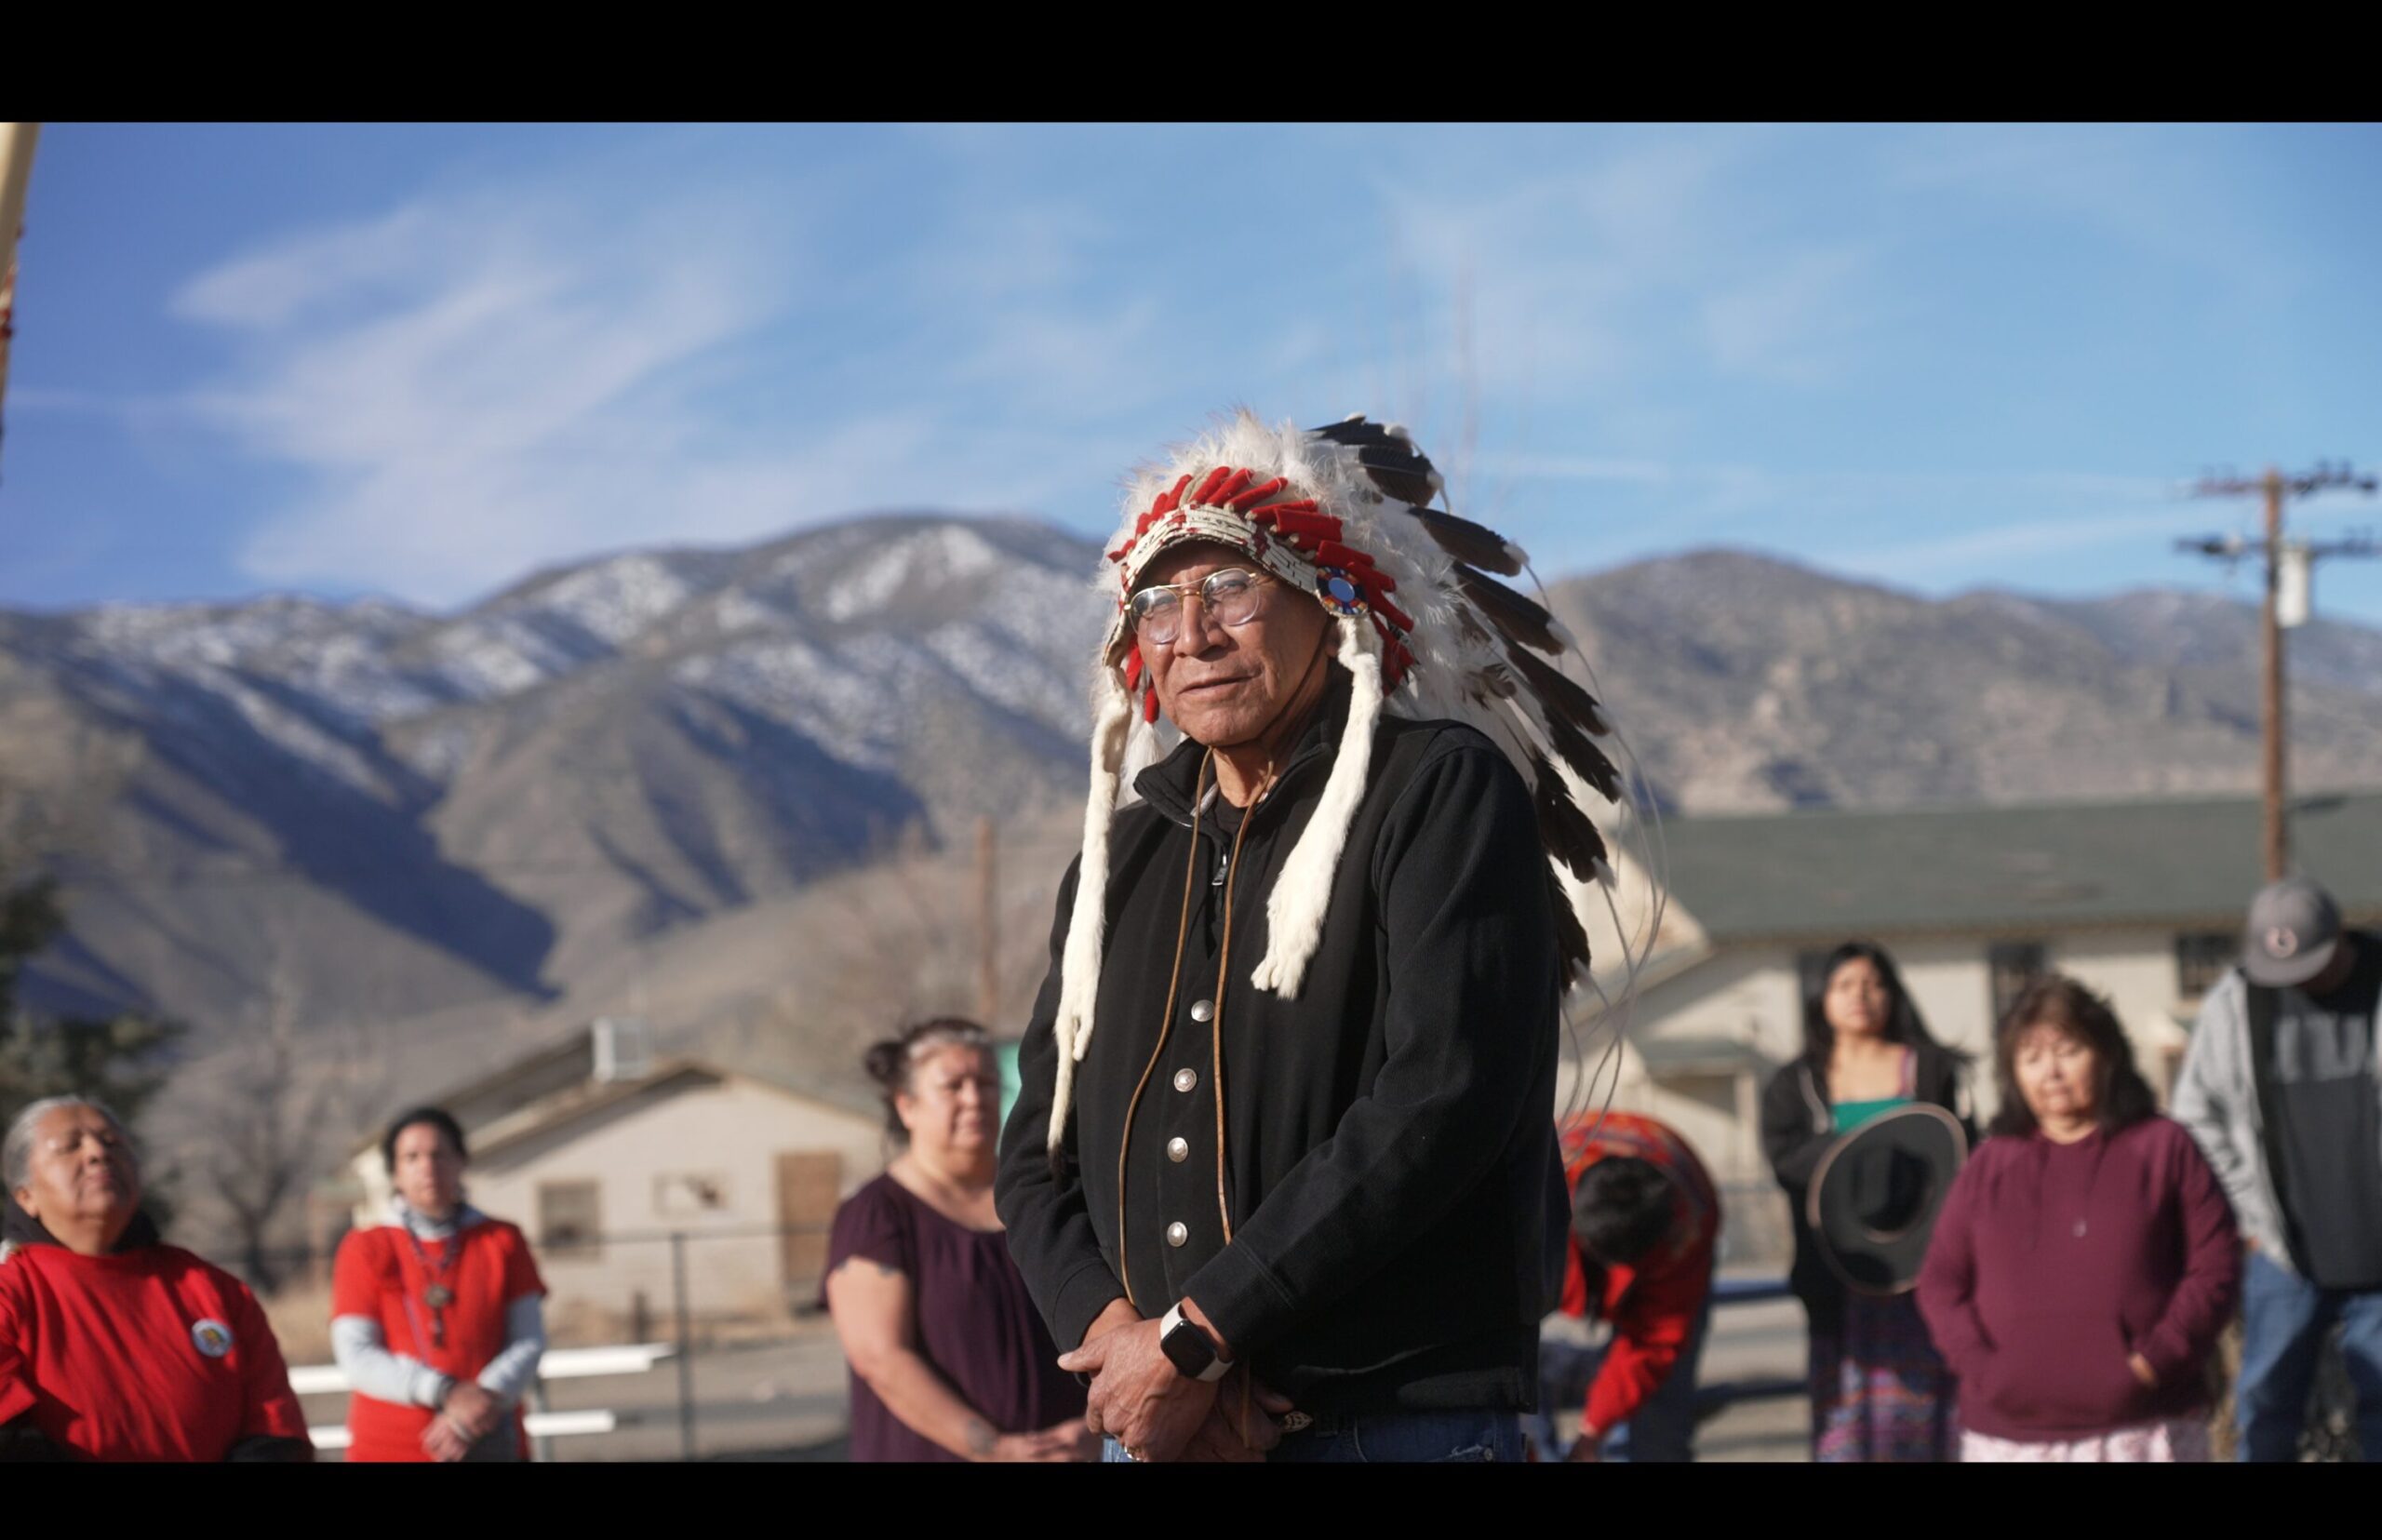 "I'm happy to be a part of this sacred time, when our people are coming back together," said Chief Arvol Looking Horse, 19th keeper of the Sacred White Buffalo Calf Pipe and Bundle, in his opening comments for the Third Annual Prayer Horse Ride on March 17. Photo credit/River Akemann